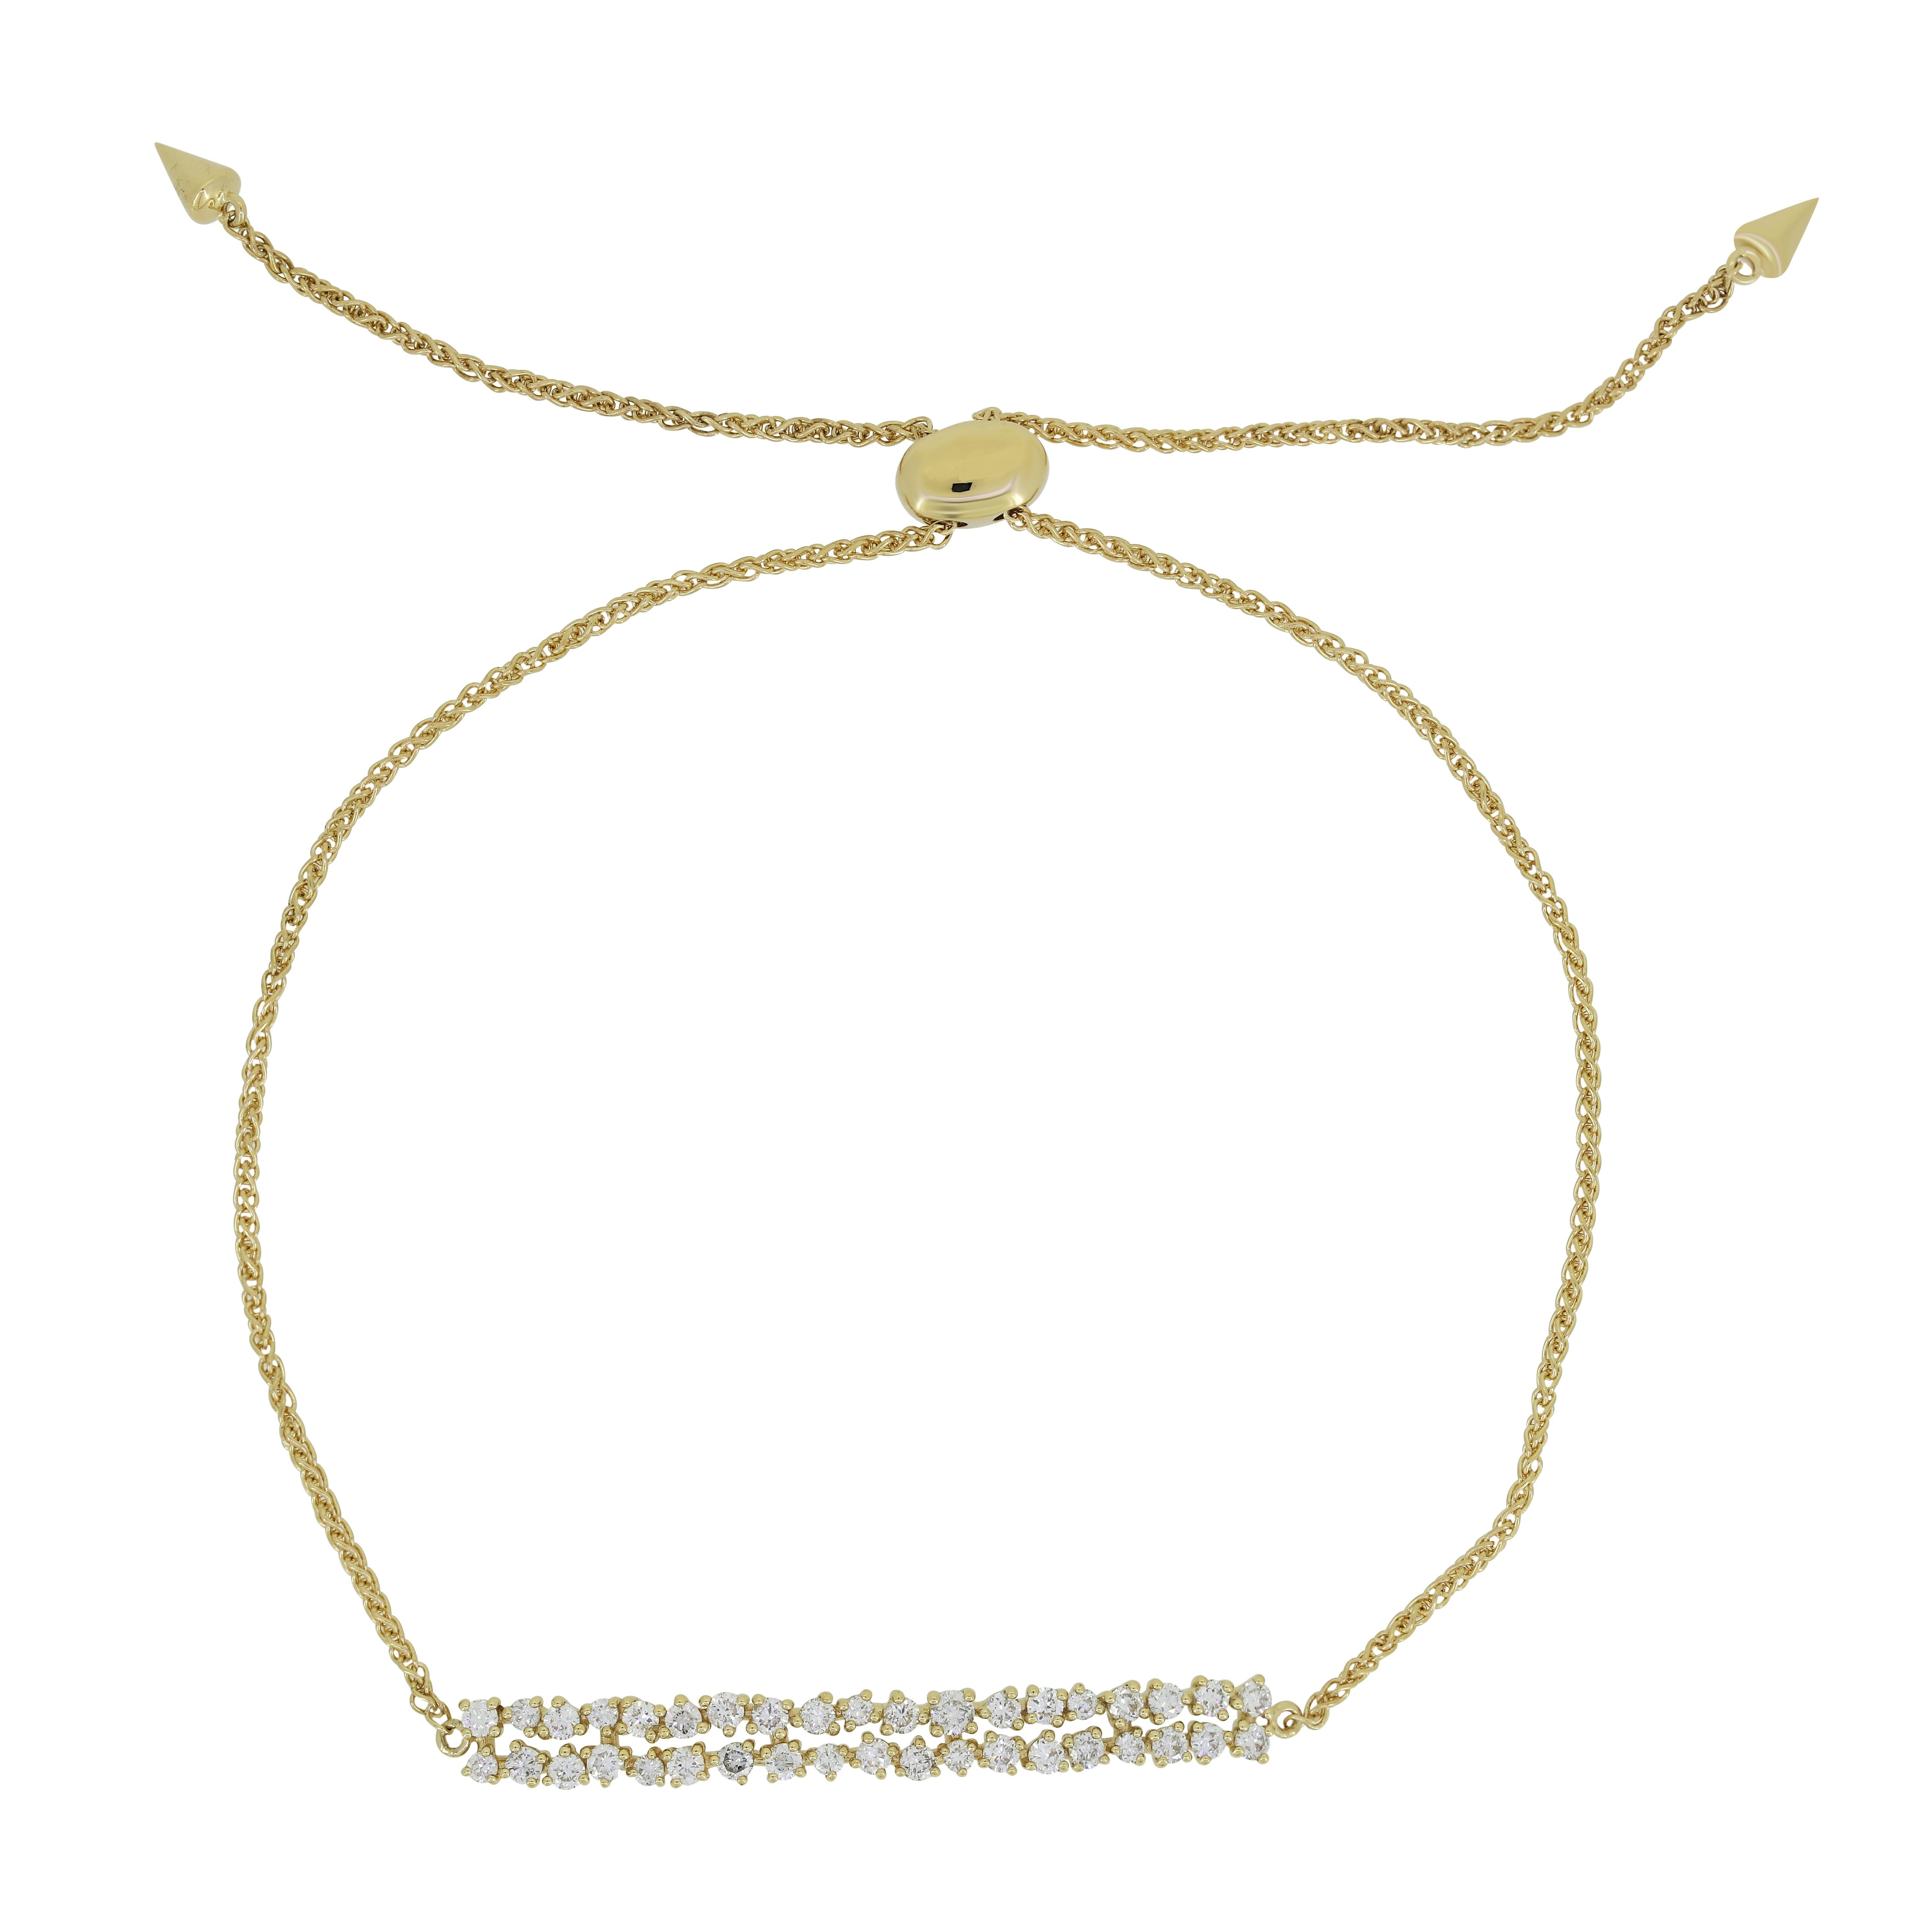 Striking in its simplicity, 0.50 Cts round brilliant-cut diamonds are set precisely in two rows crafted by Luxle in 14K Yellow Gold. This bracelet features a minimal design that's subtle enough to wear every day and comes with a bolo clasp.
Please